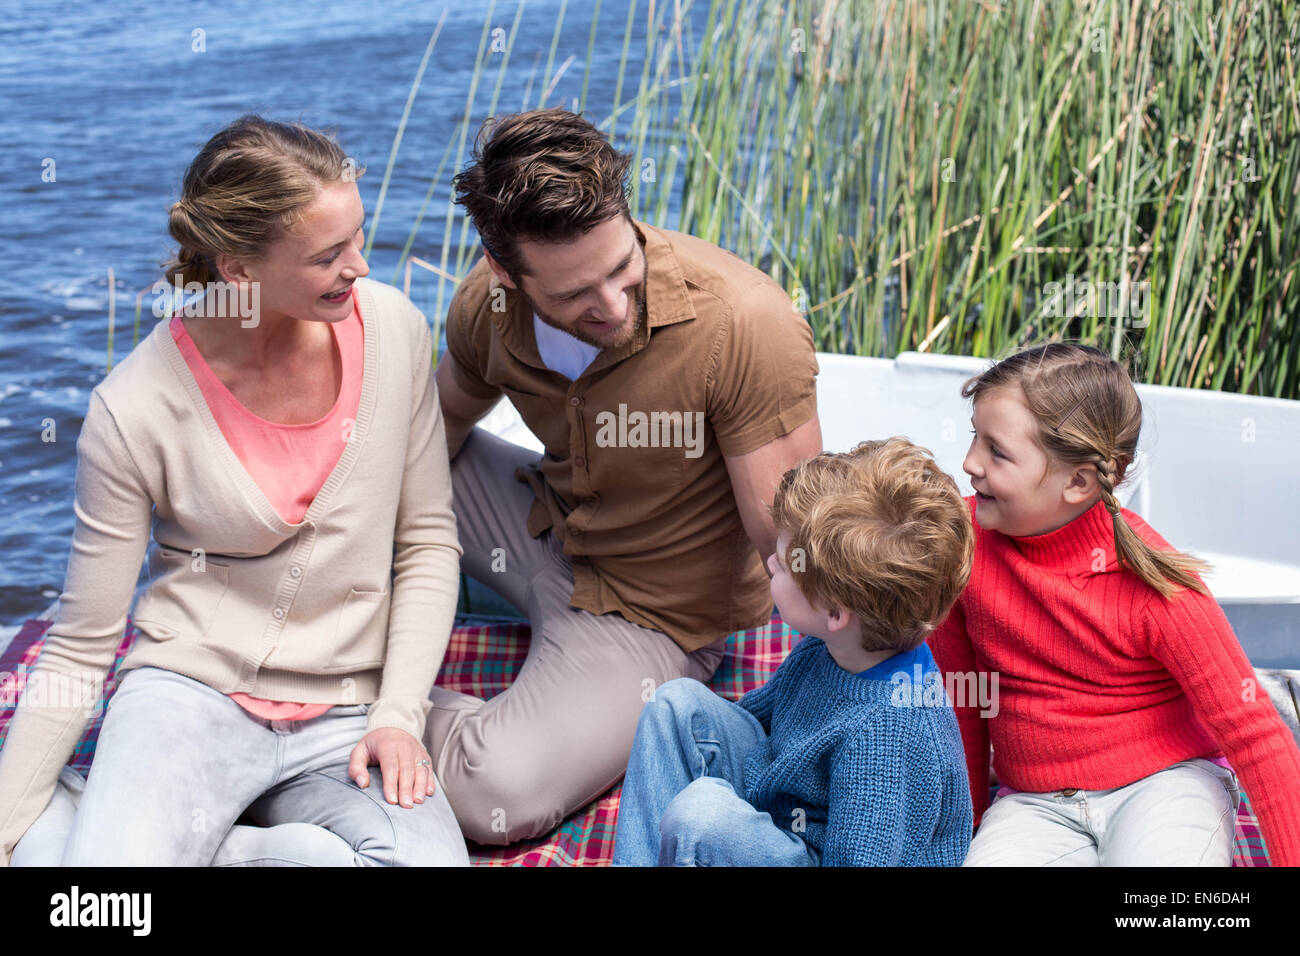 Happy family at a lake Banque D'Images